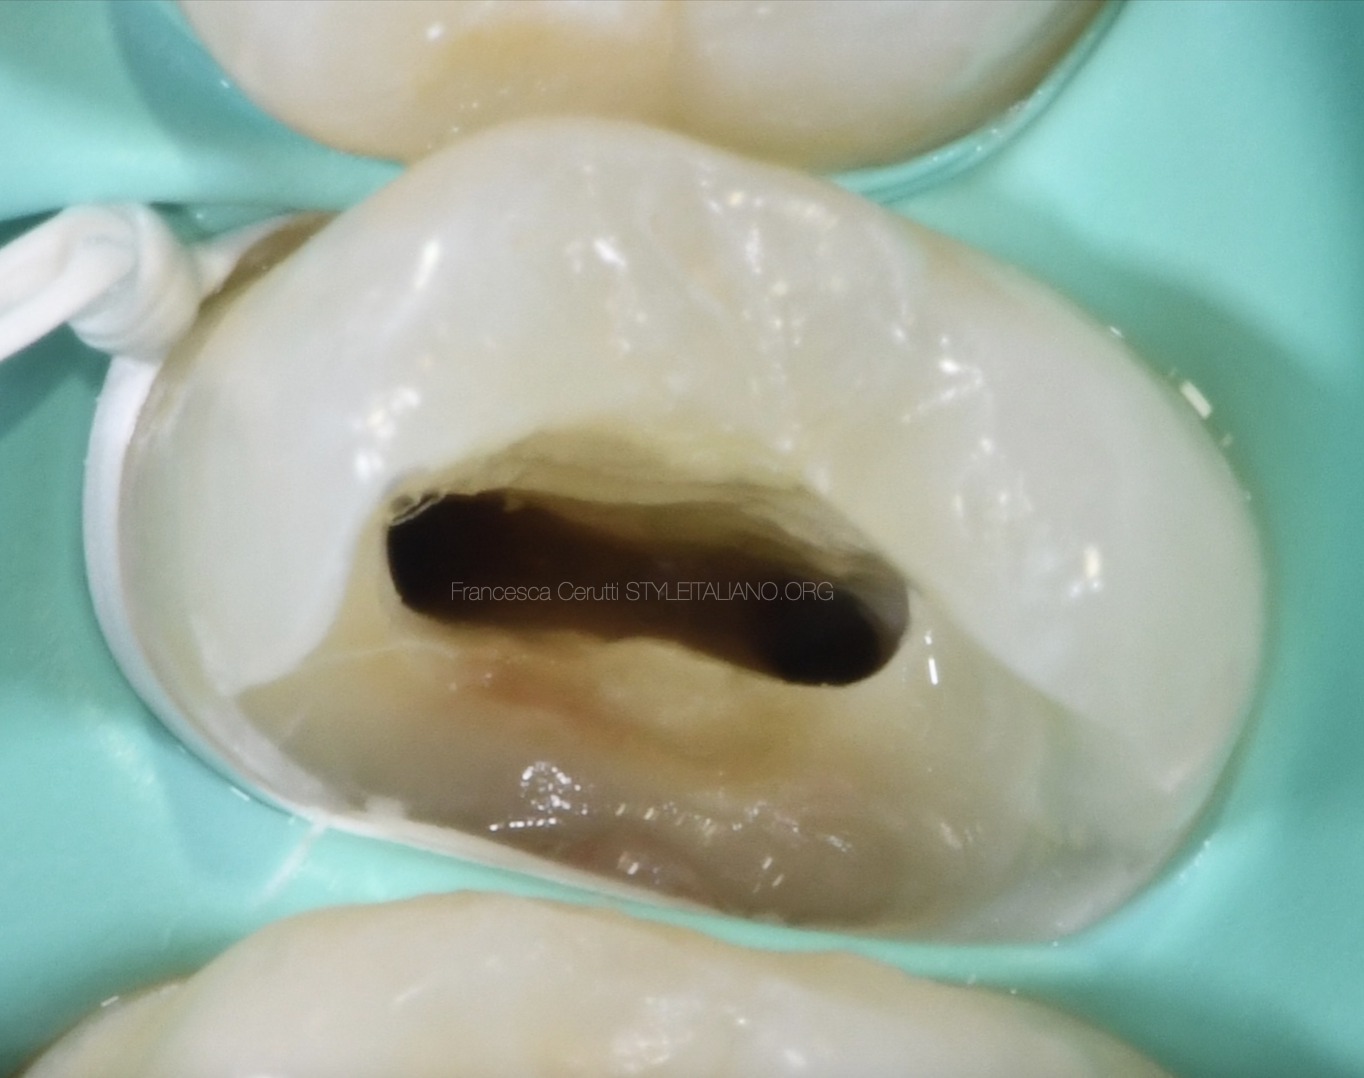 Endo-resto management of a poorly treated premolar